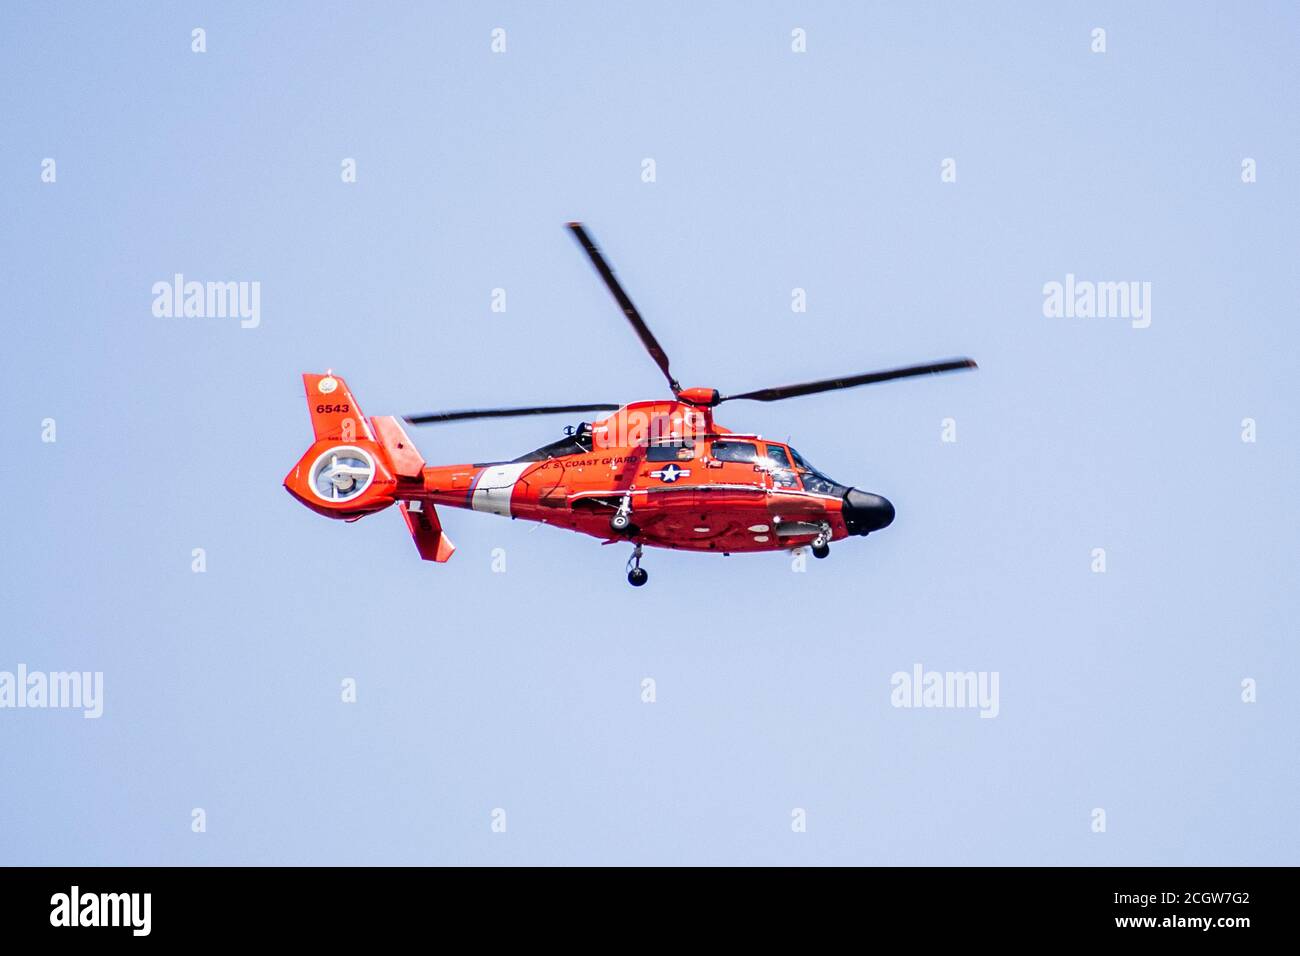 September 9, 2020 Sunnyvale / CA / USA - U.S. Coast Guard helicopter performing a flight in South San Francisco Bay Area; Stock Photo